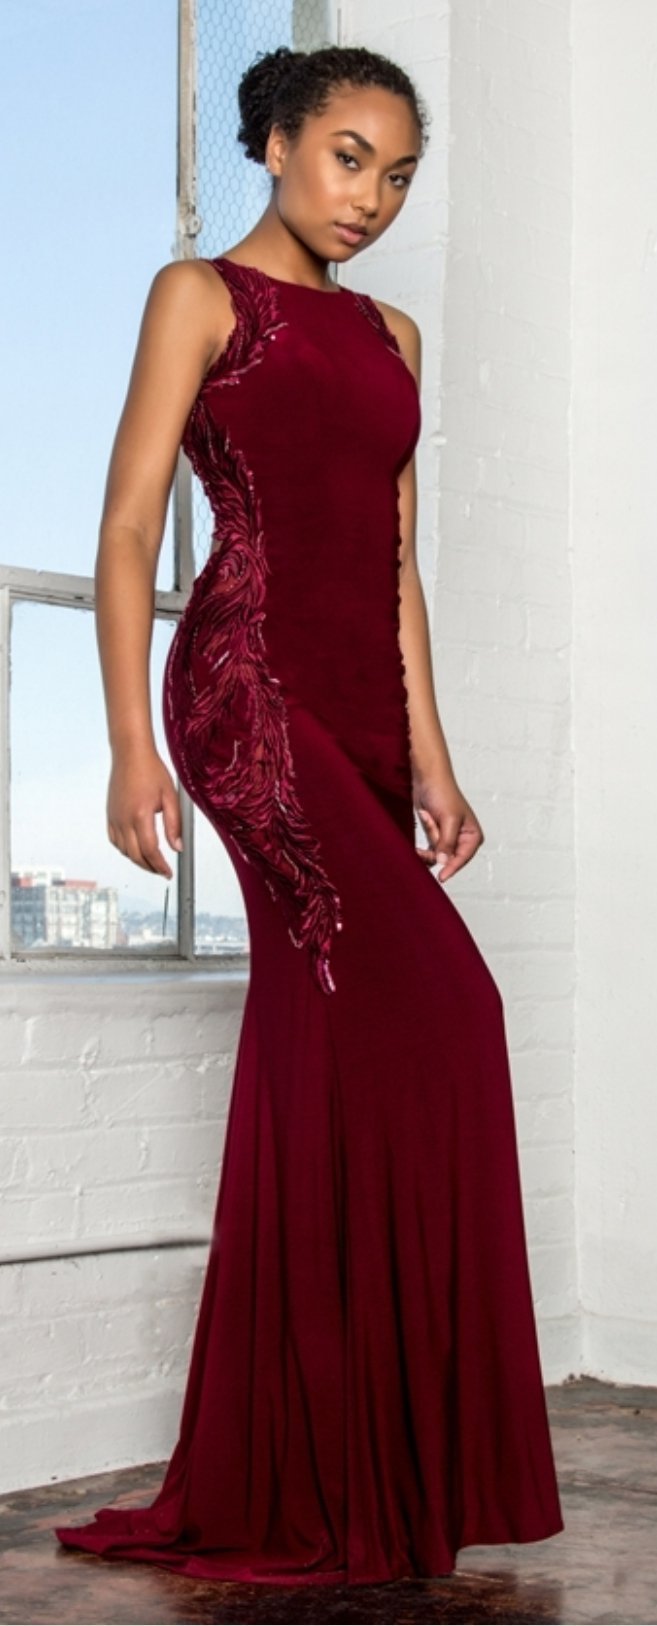 Open-Back Jersey Long Dress Accented with Side Embroidery - Fashdime